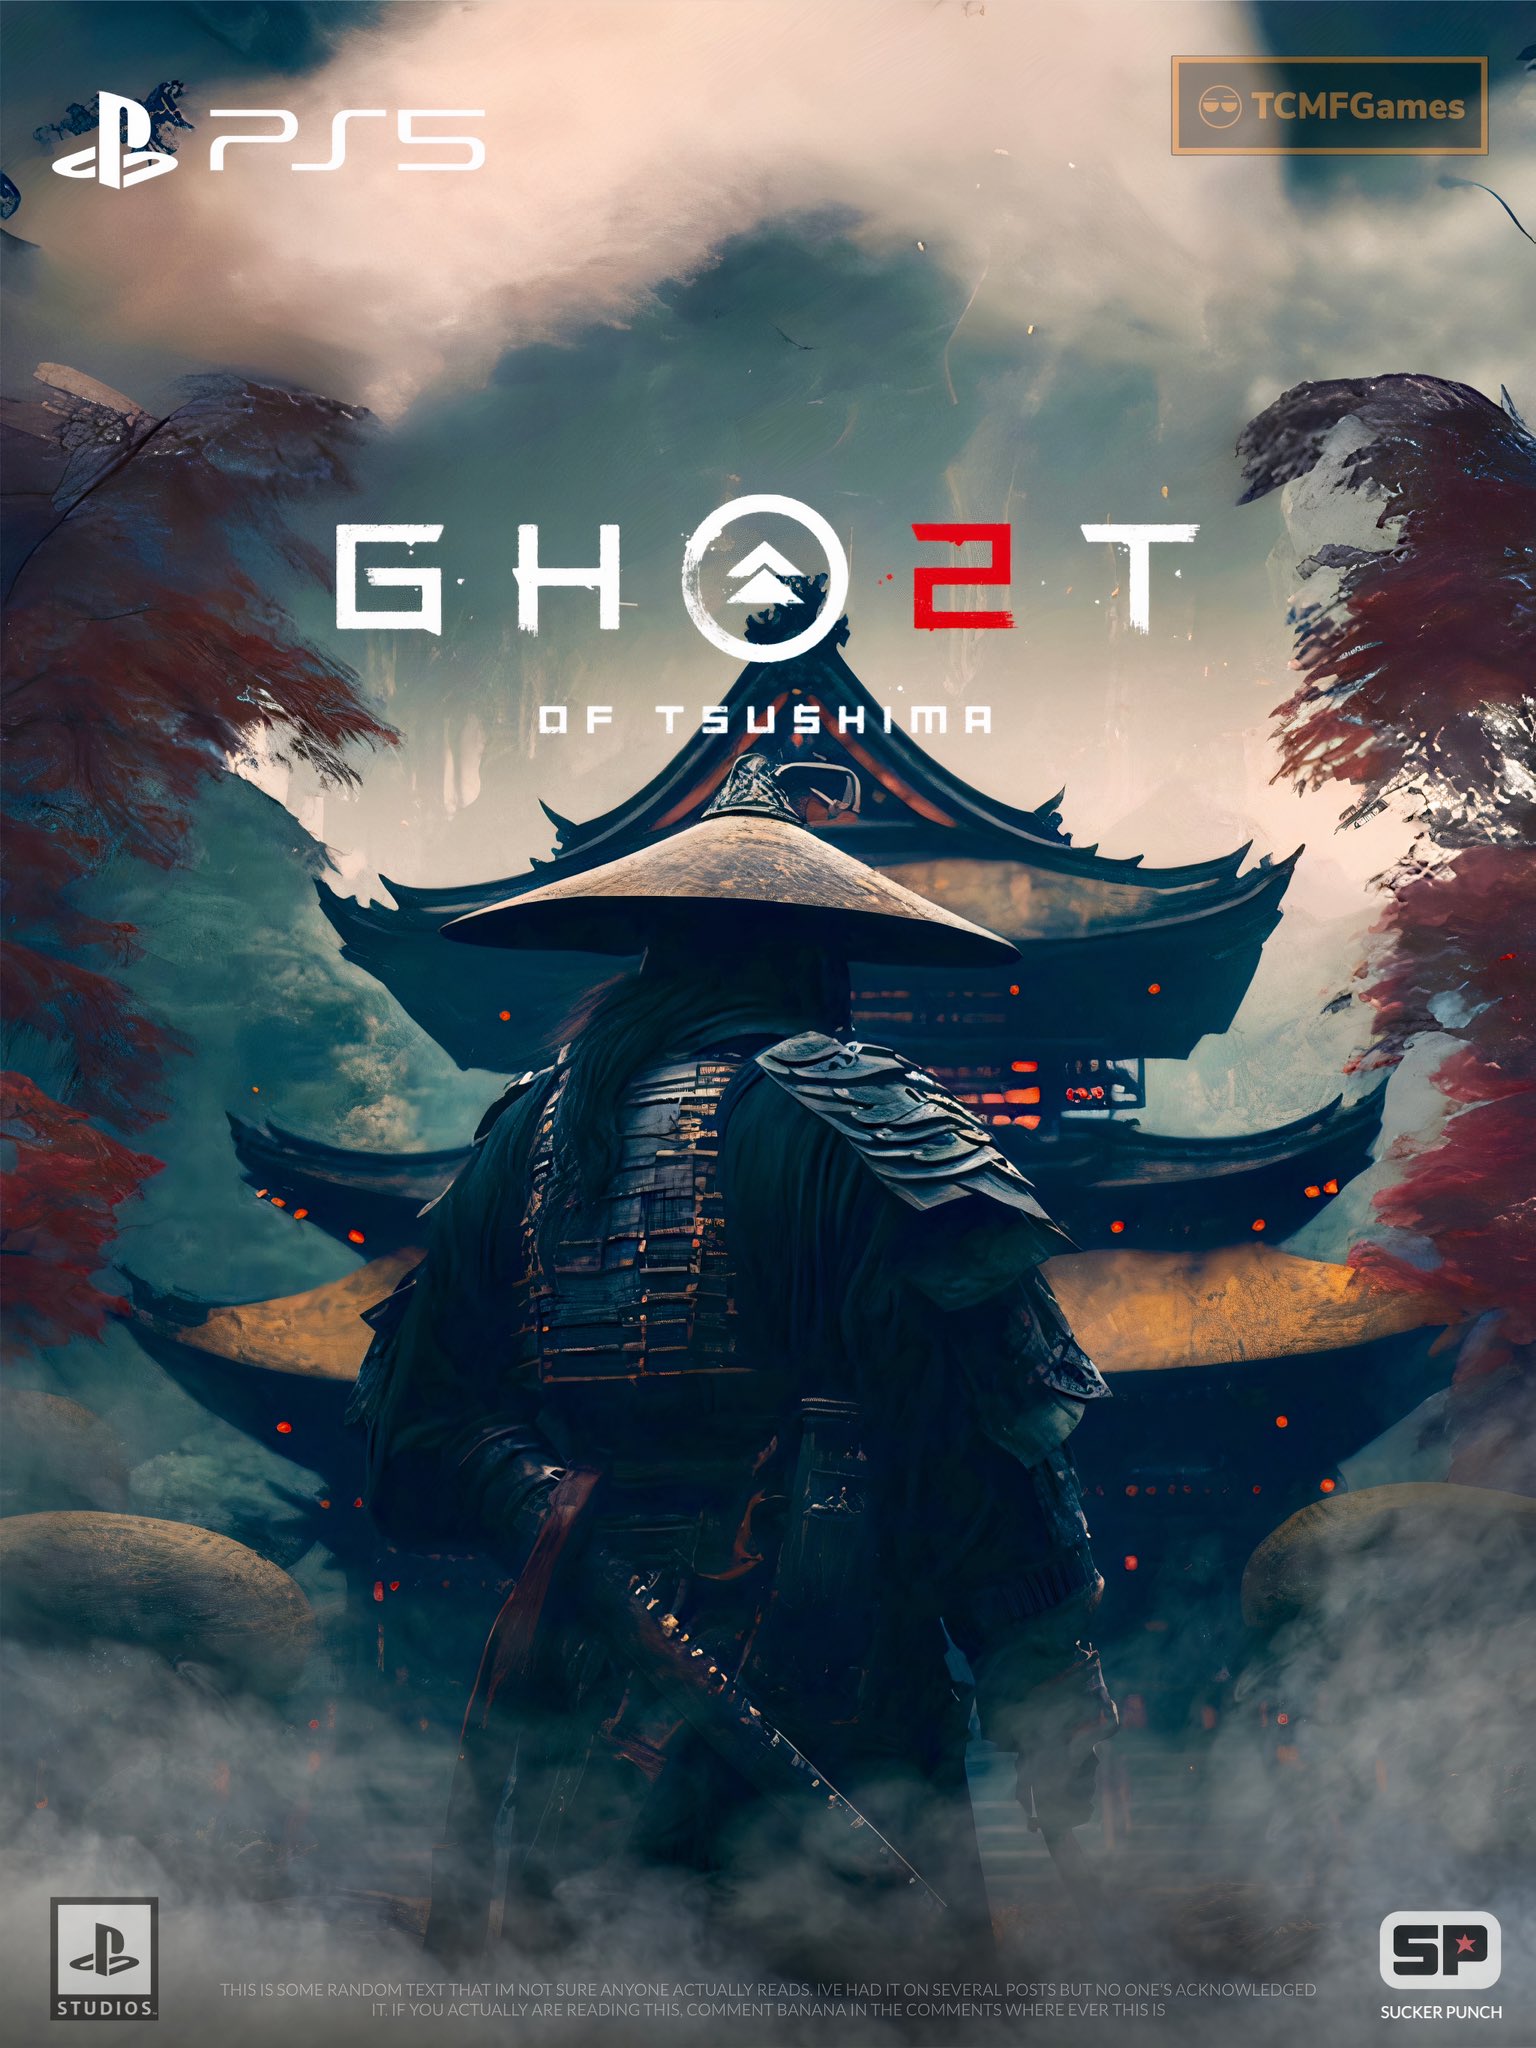 TCMFGames on X: Ghost of Tsushima 2, Only on PS5